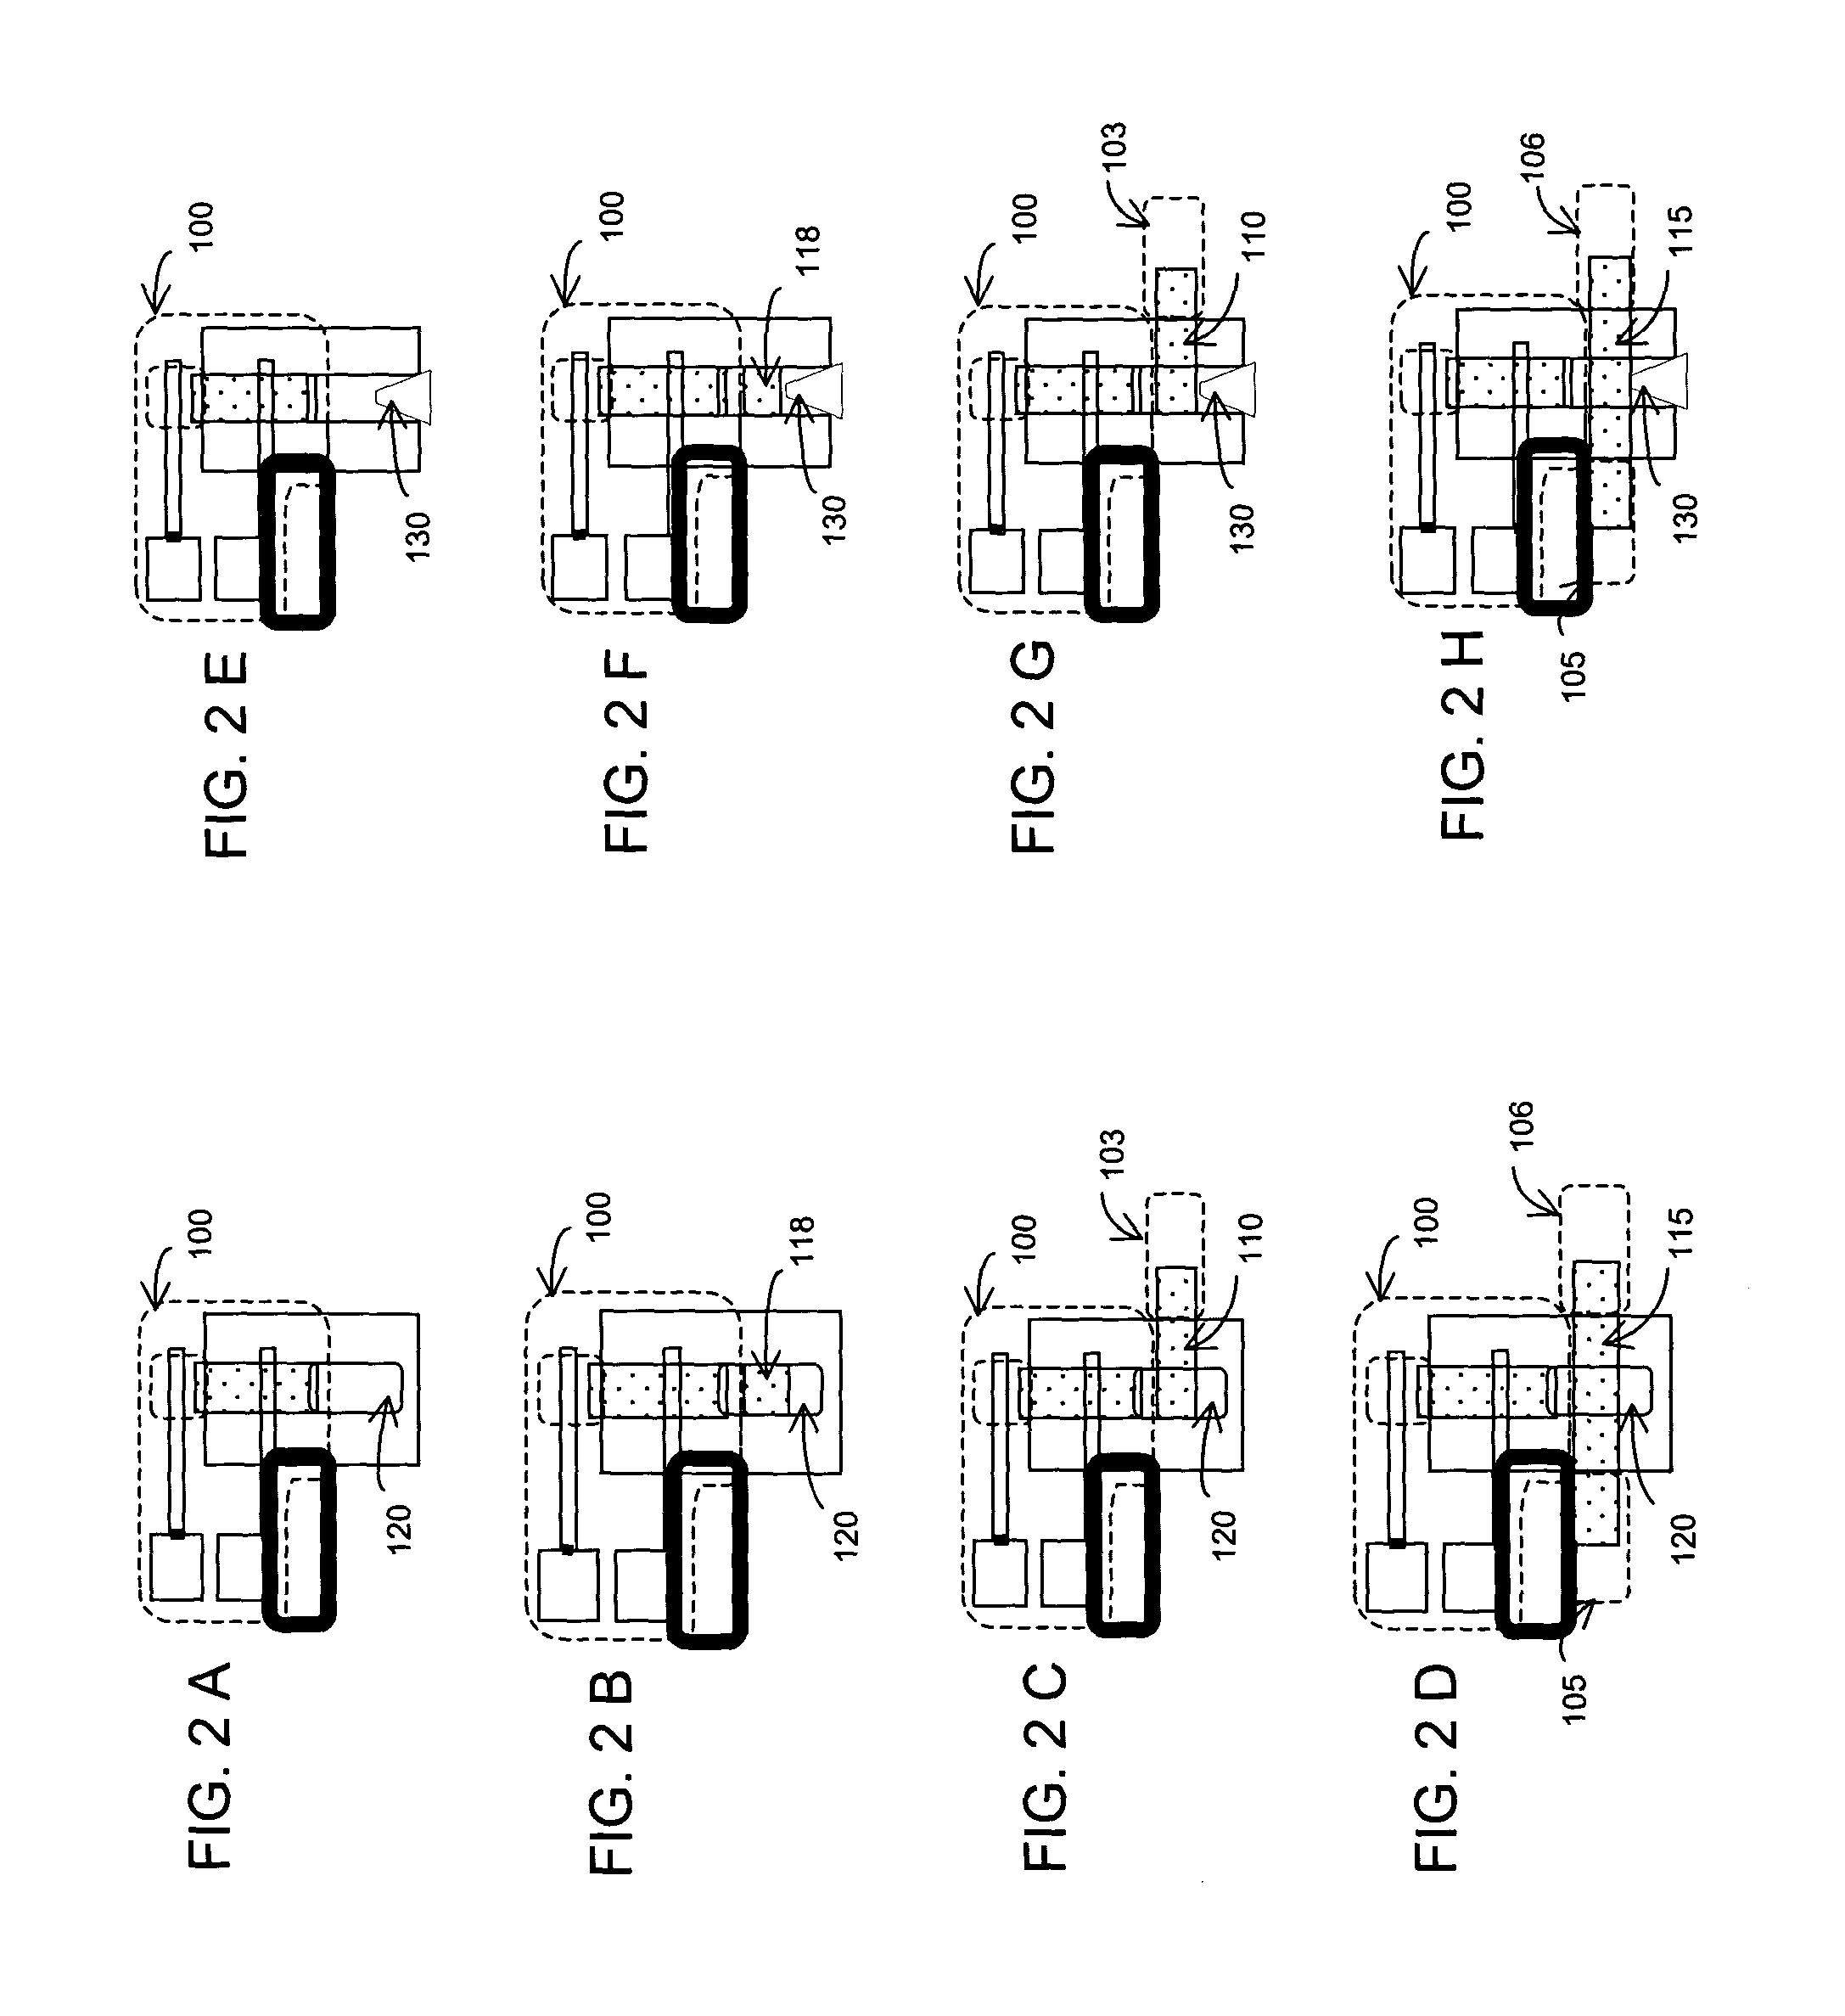 Lateral flow diagnostic devices with instrument controlled fluidics